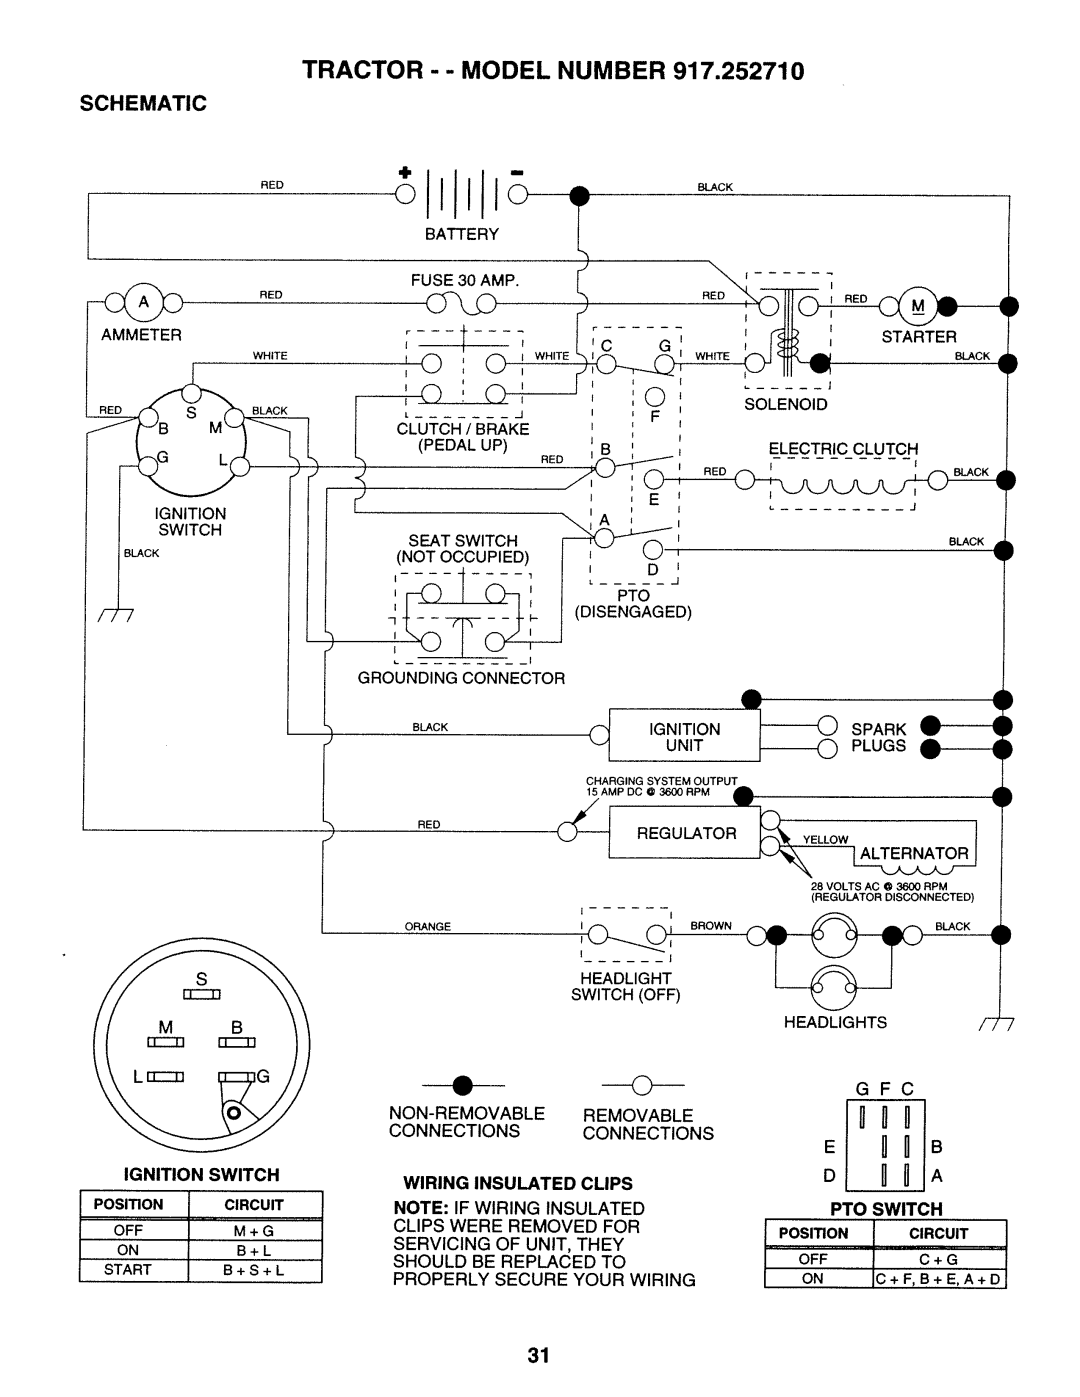 Sears 917.25271 •JlJ, o111o, EIn D U, Tractor - - Model Number, Schematic, L__ _L _____, Ignition, Pto Switch, M _-__ 